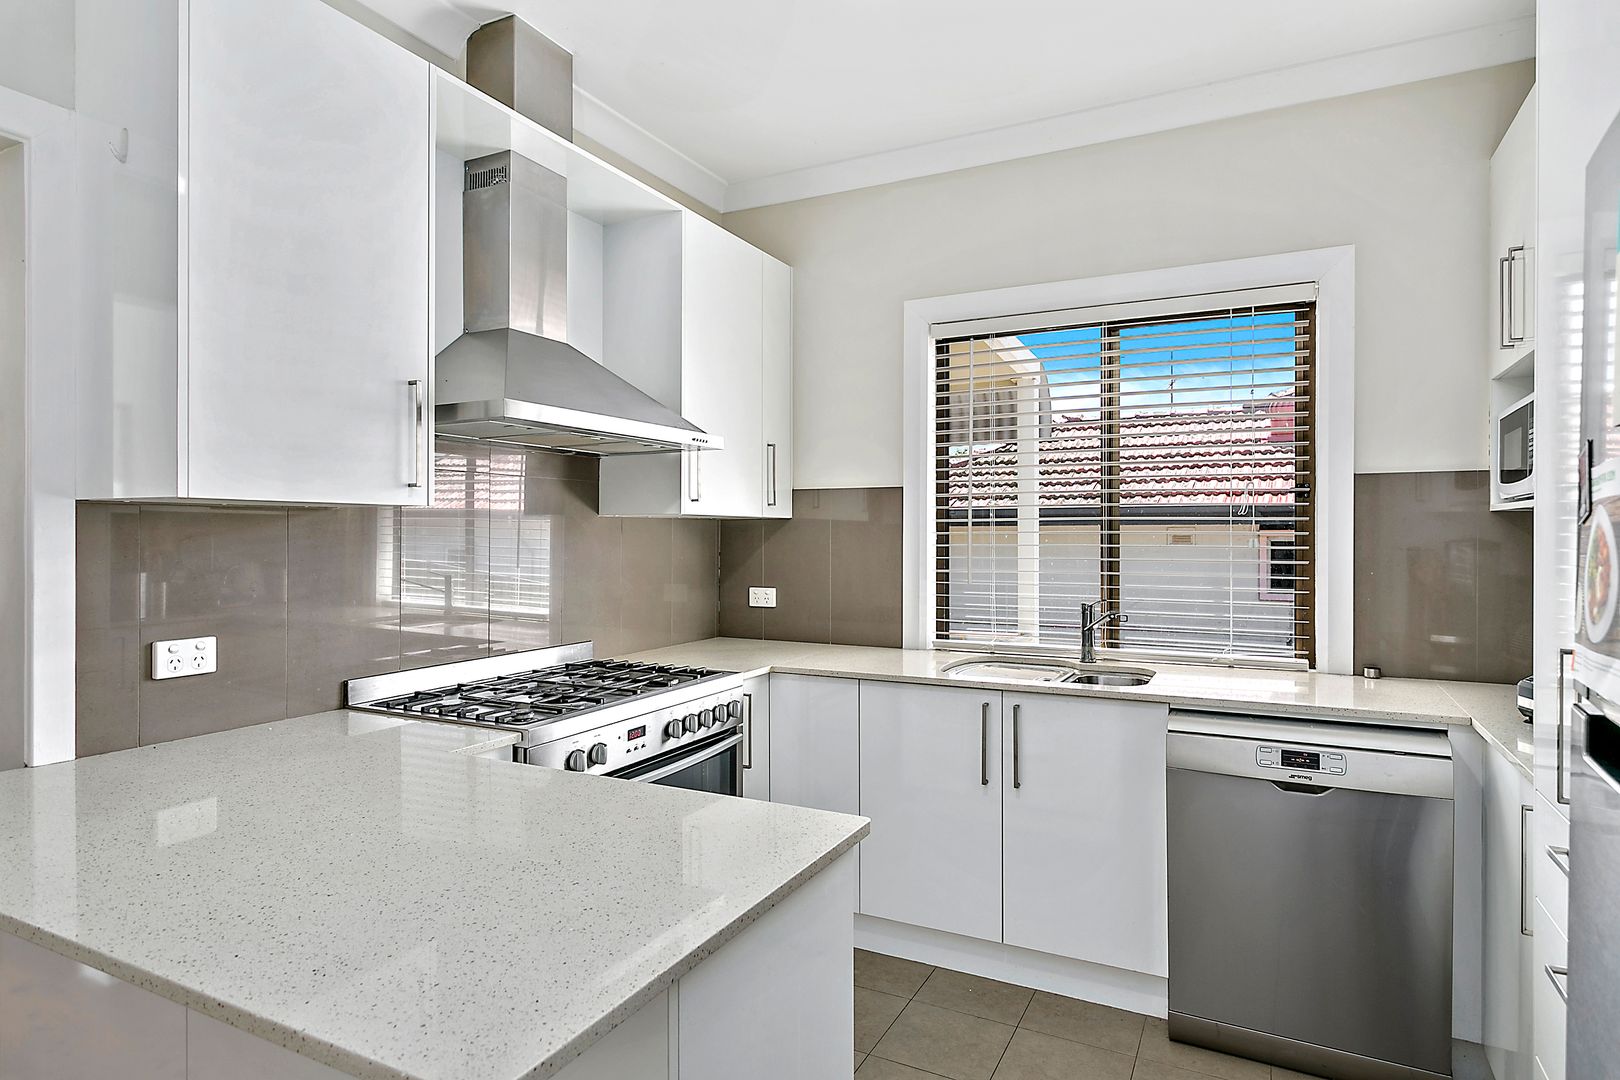 1/11 Dempster Street, West Wollongong NSW 2500, Image 2